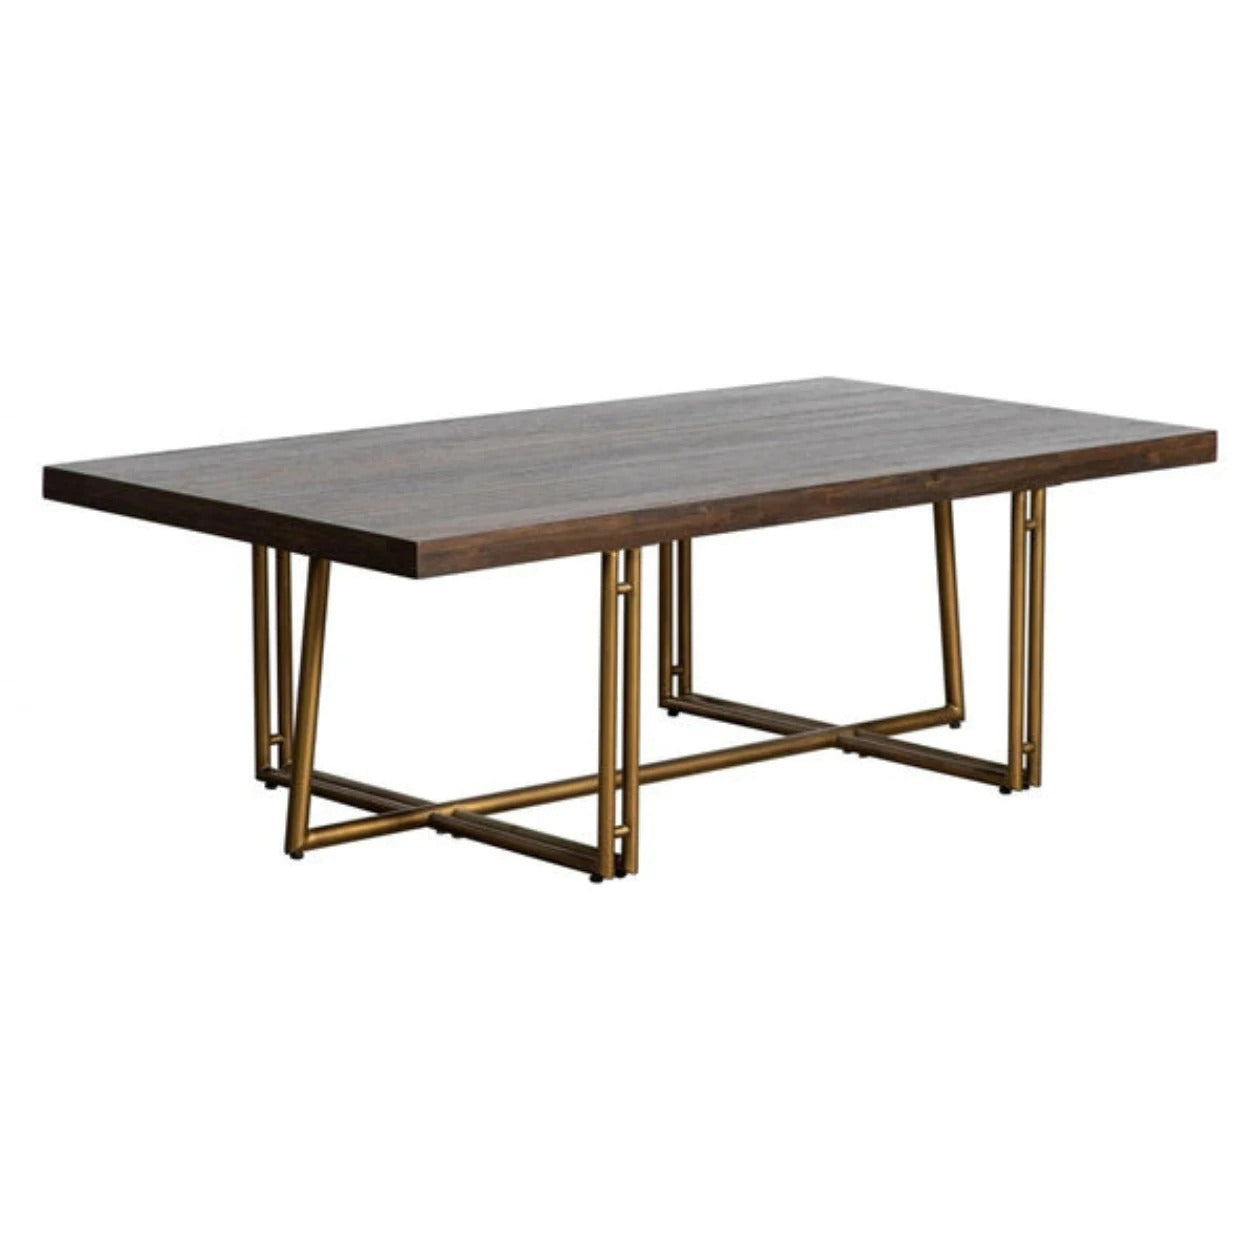 Dining Table Design, Modern Dining Table Design, Wooden Dining Table Design